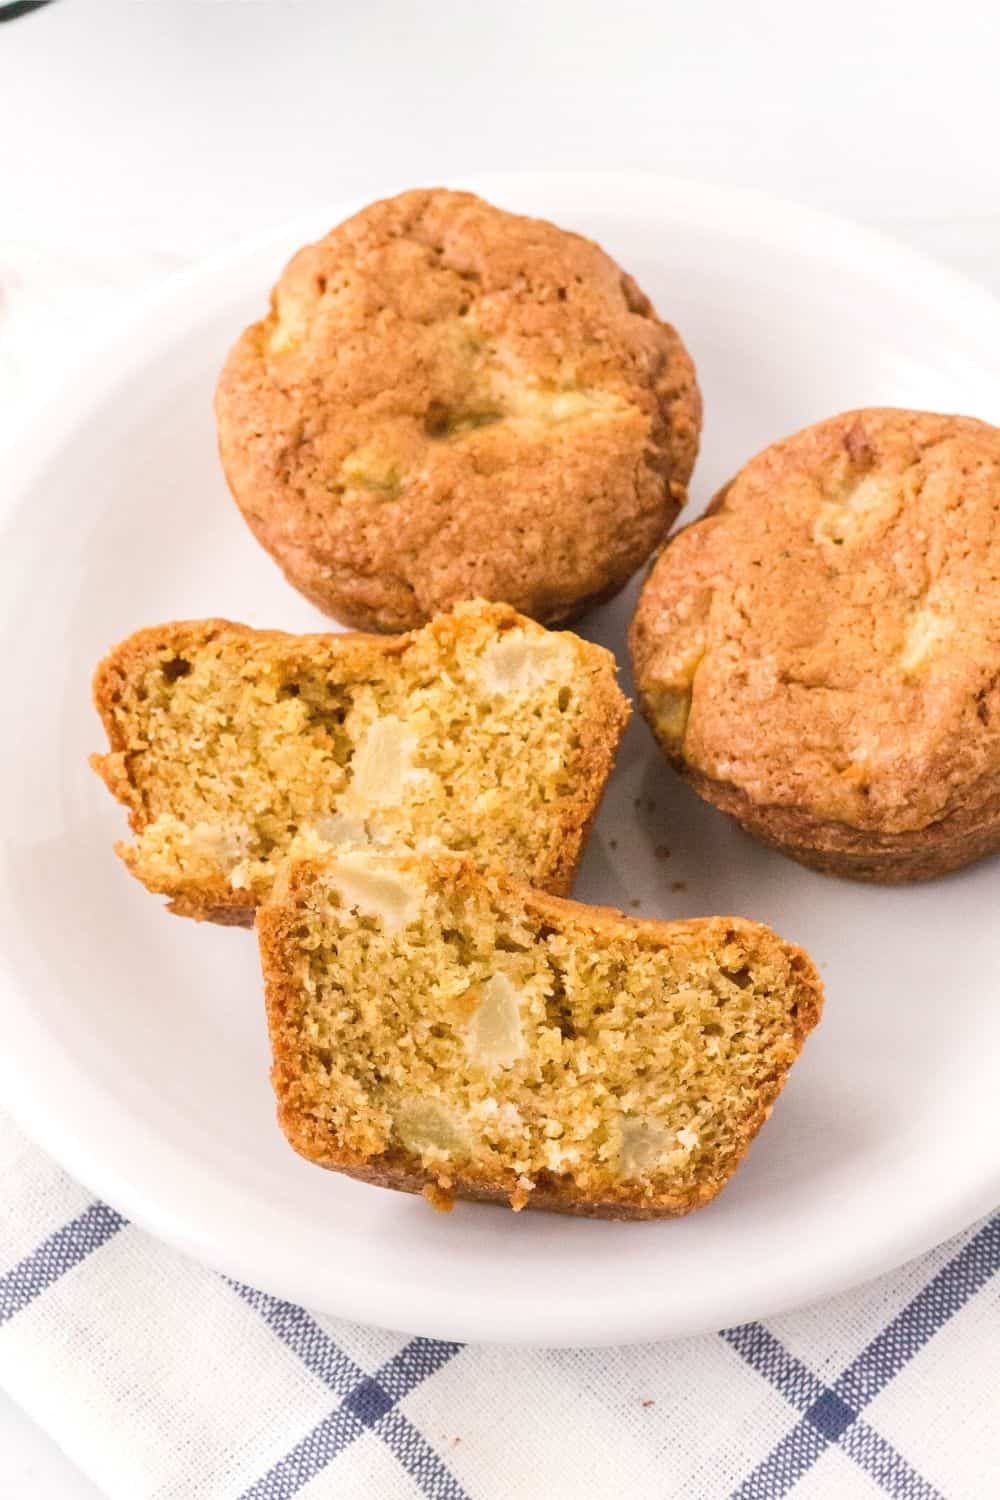 Pear muffins without streusel served on a white plate. One muffin is cut in half, showing the tender interior dotted with diced pears.